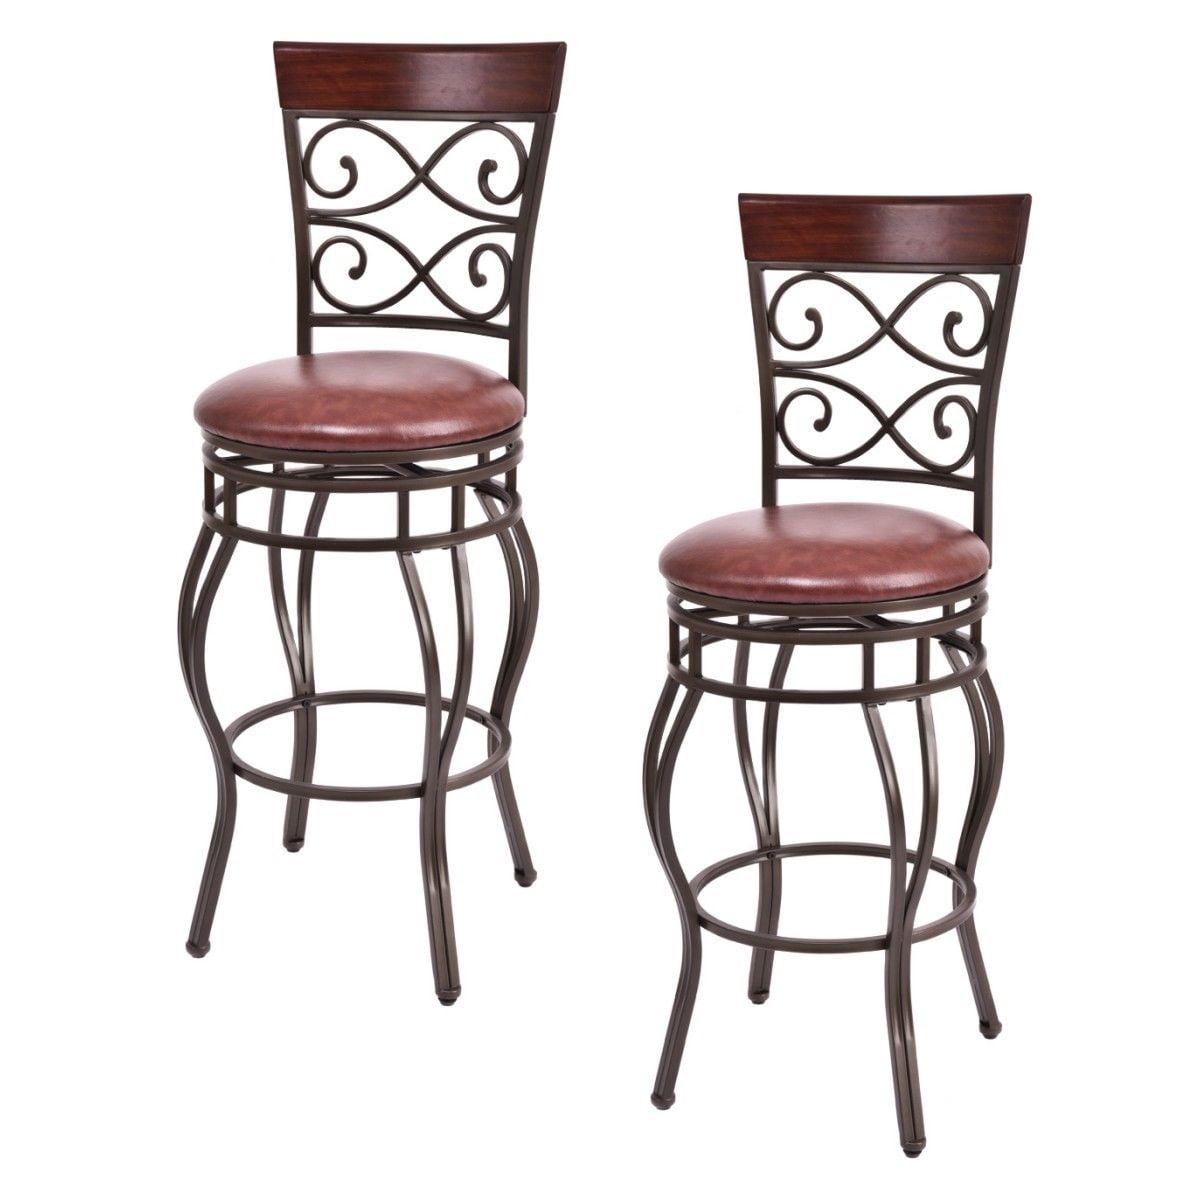 Set of 2 Bar Stool Adjustable Height Leather Counter Swivel Bistro Dining Chair 